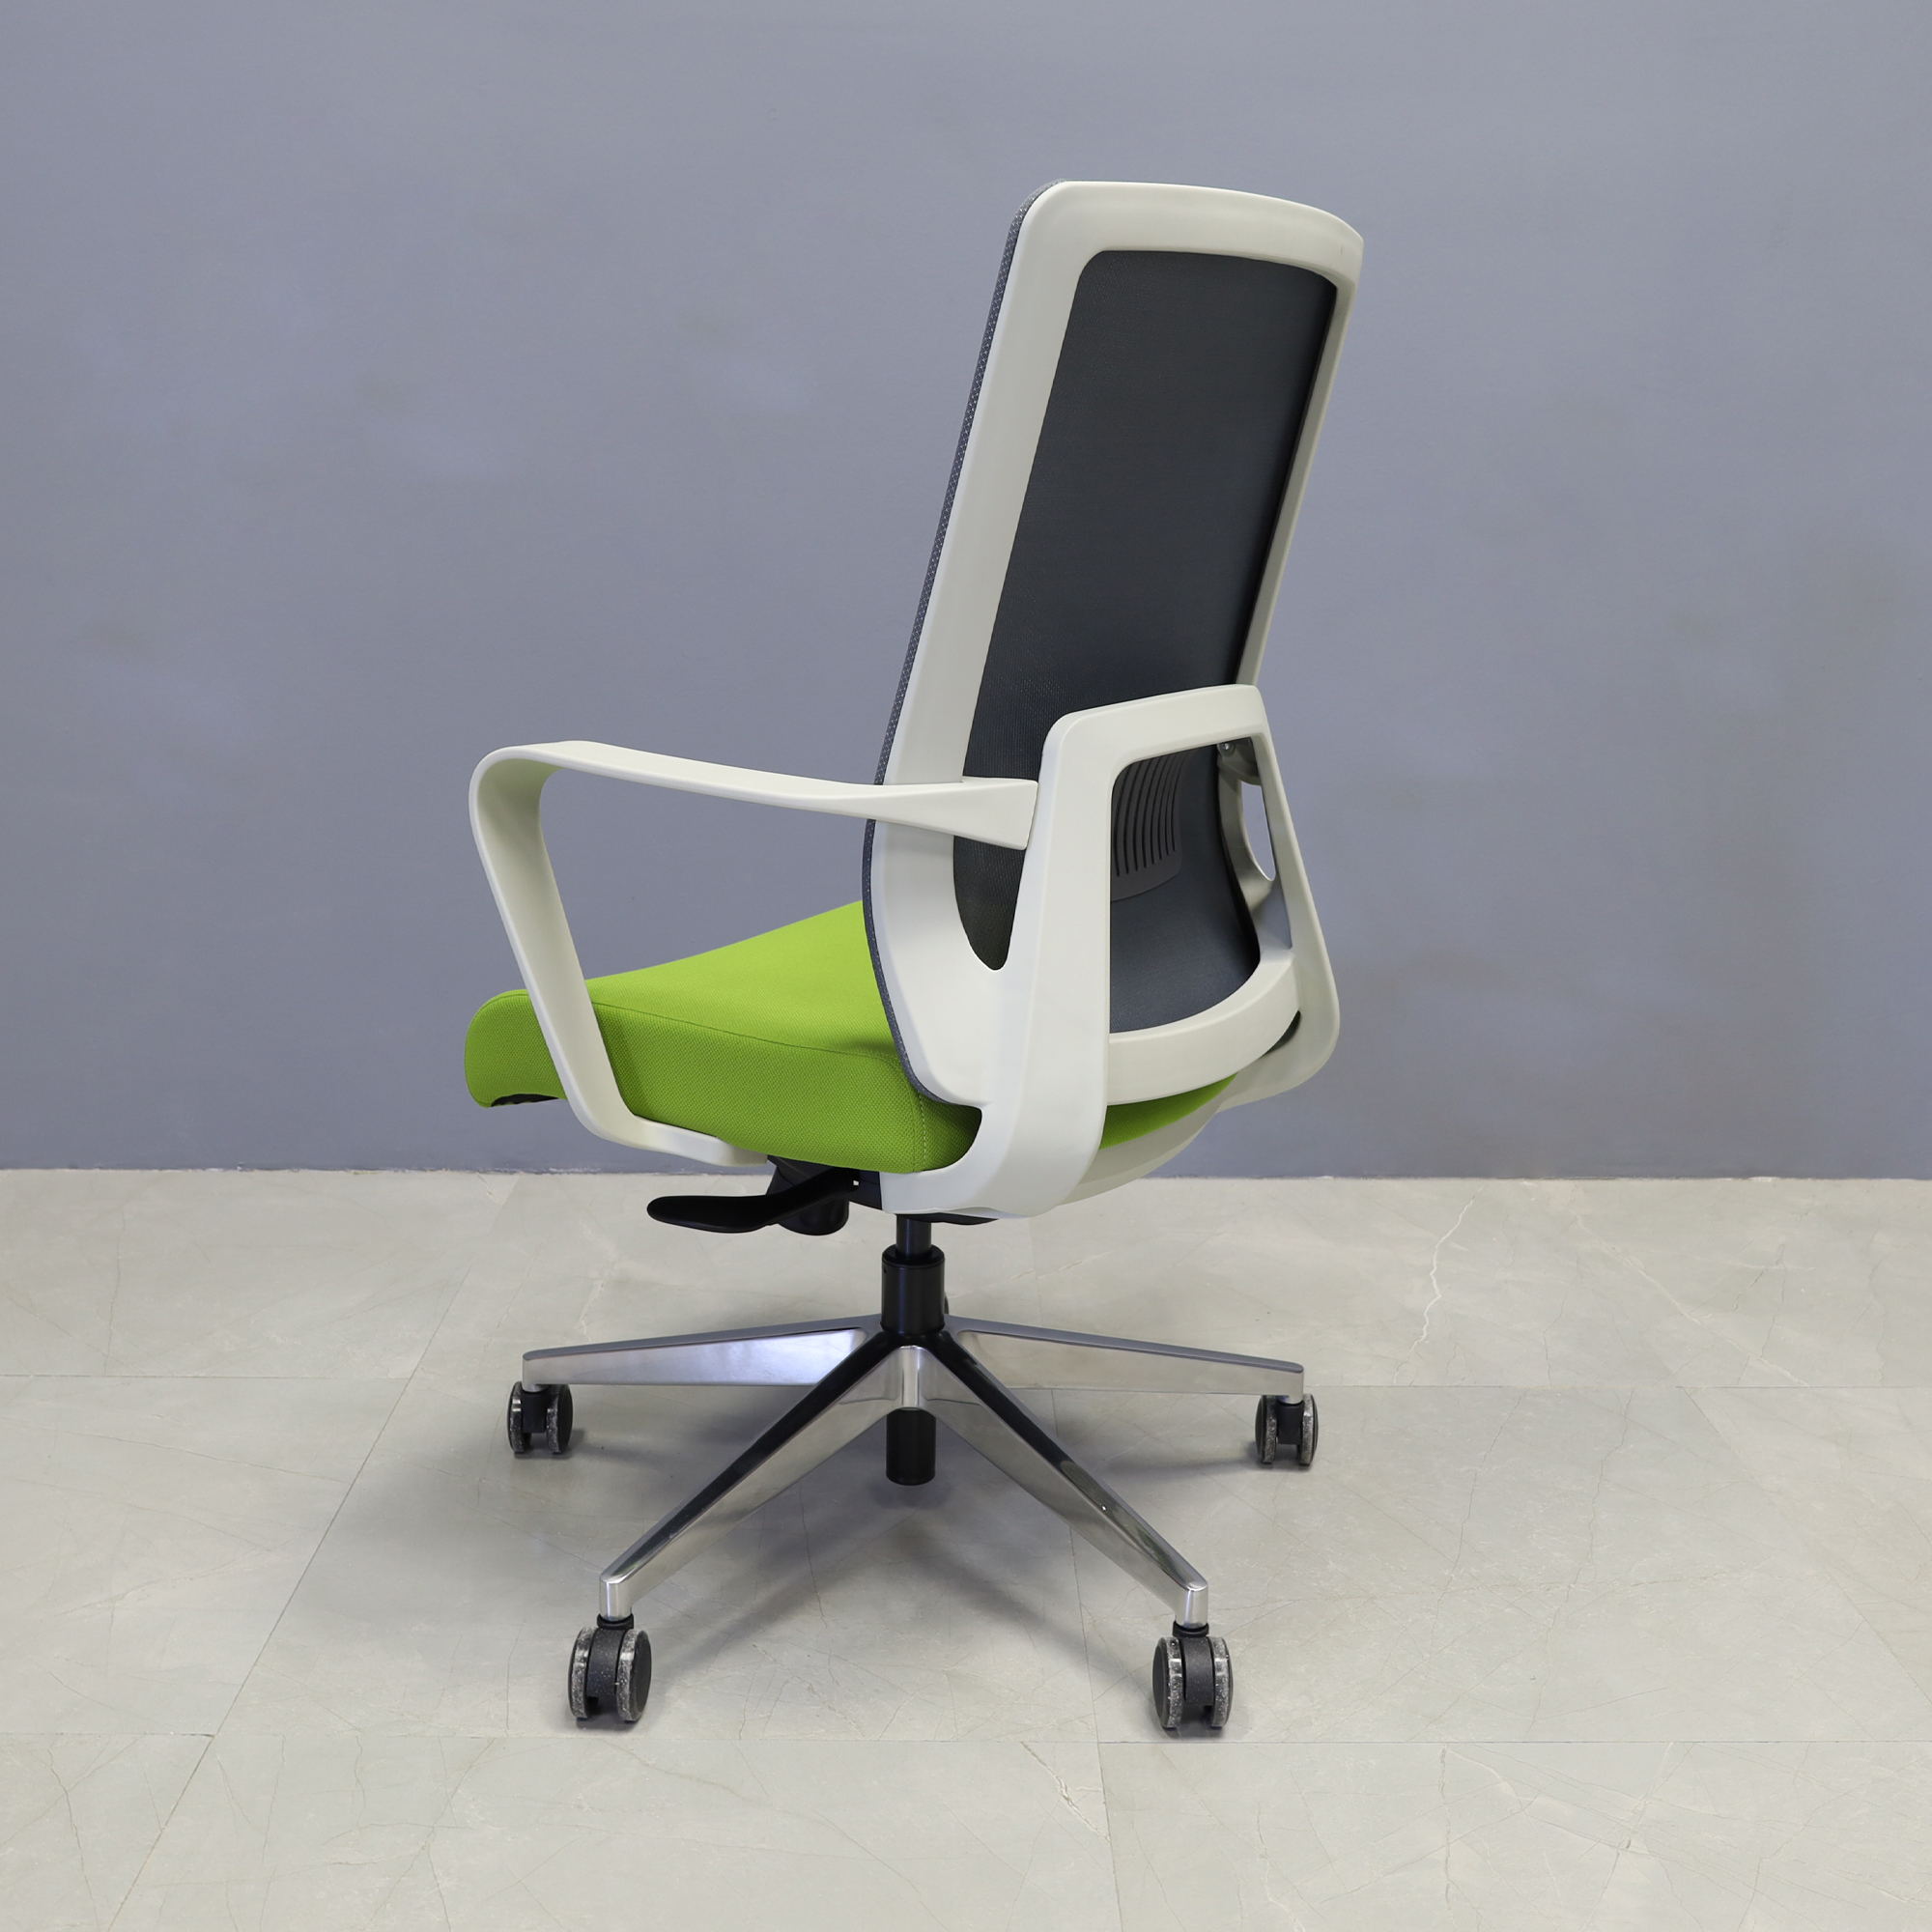 Terra Office Chair with Fixed Arms in light gray mesh back and lime green fabric seat cushion, shown here.